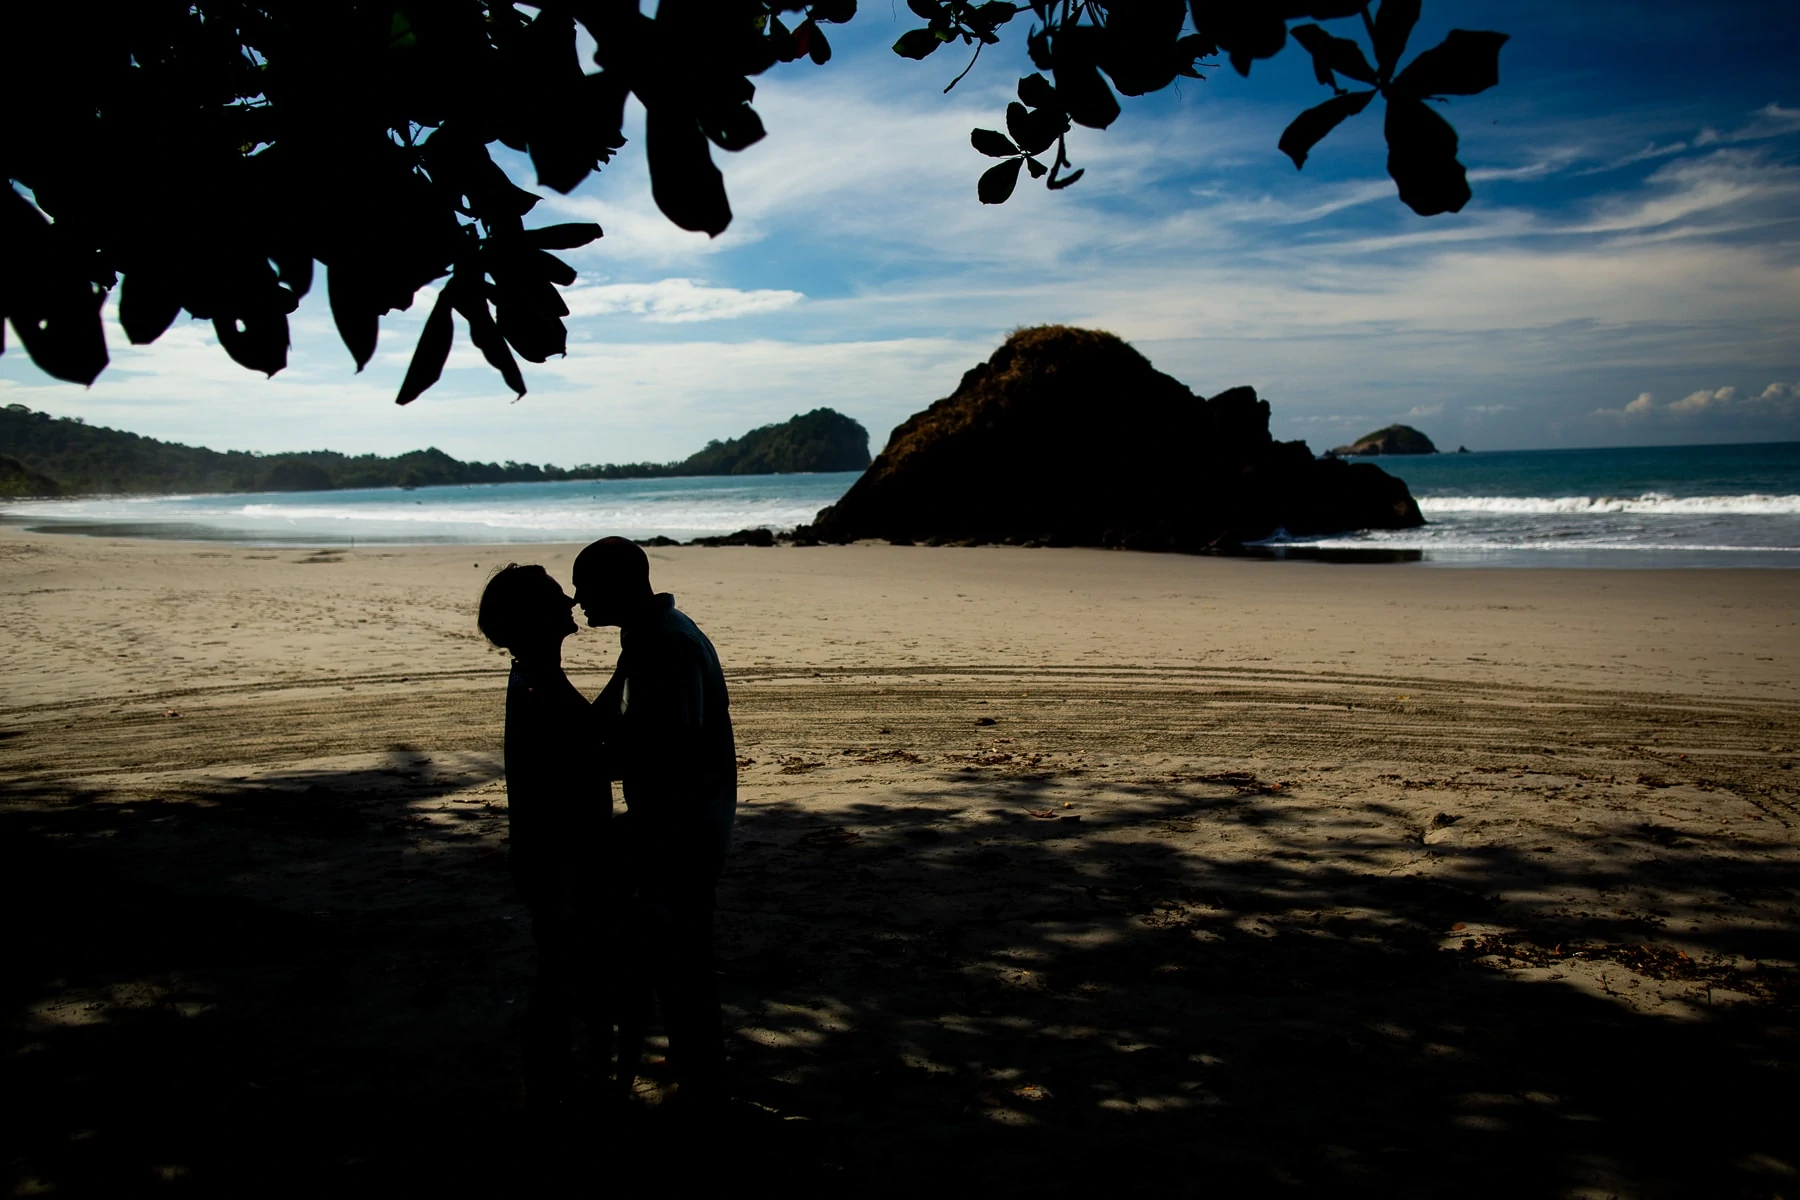 An elopement couple's silhouettes at the beach in Manuel Antonio, Costa Rica.